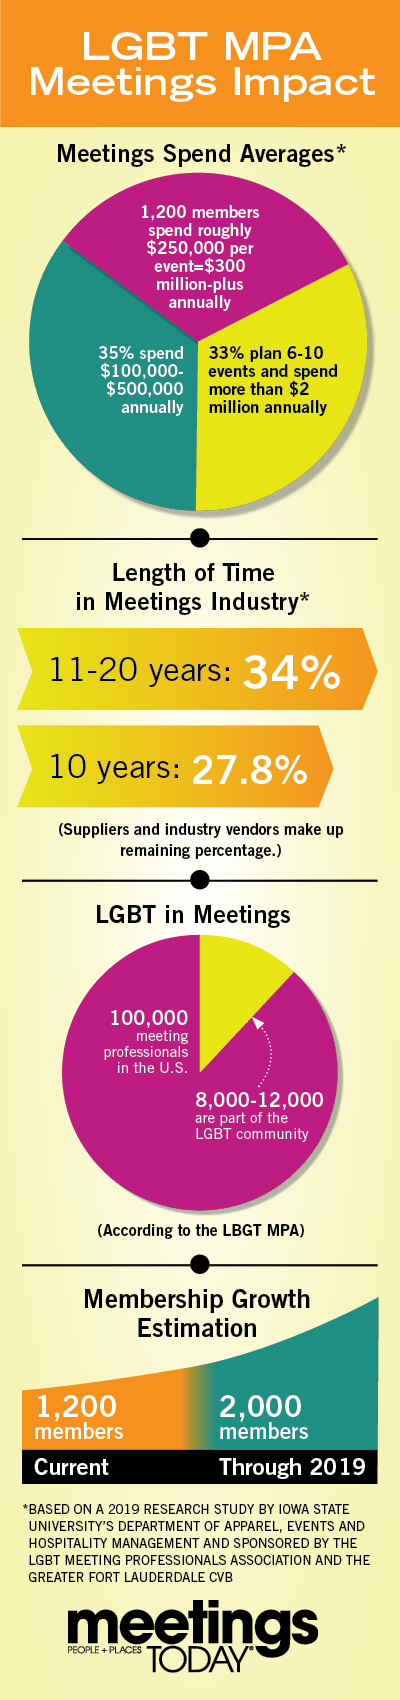 LGBT MPA Meetings Impact Infographic